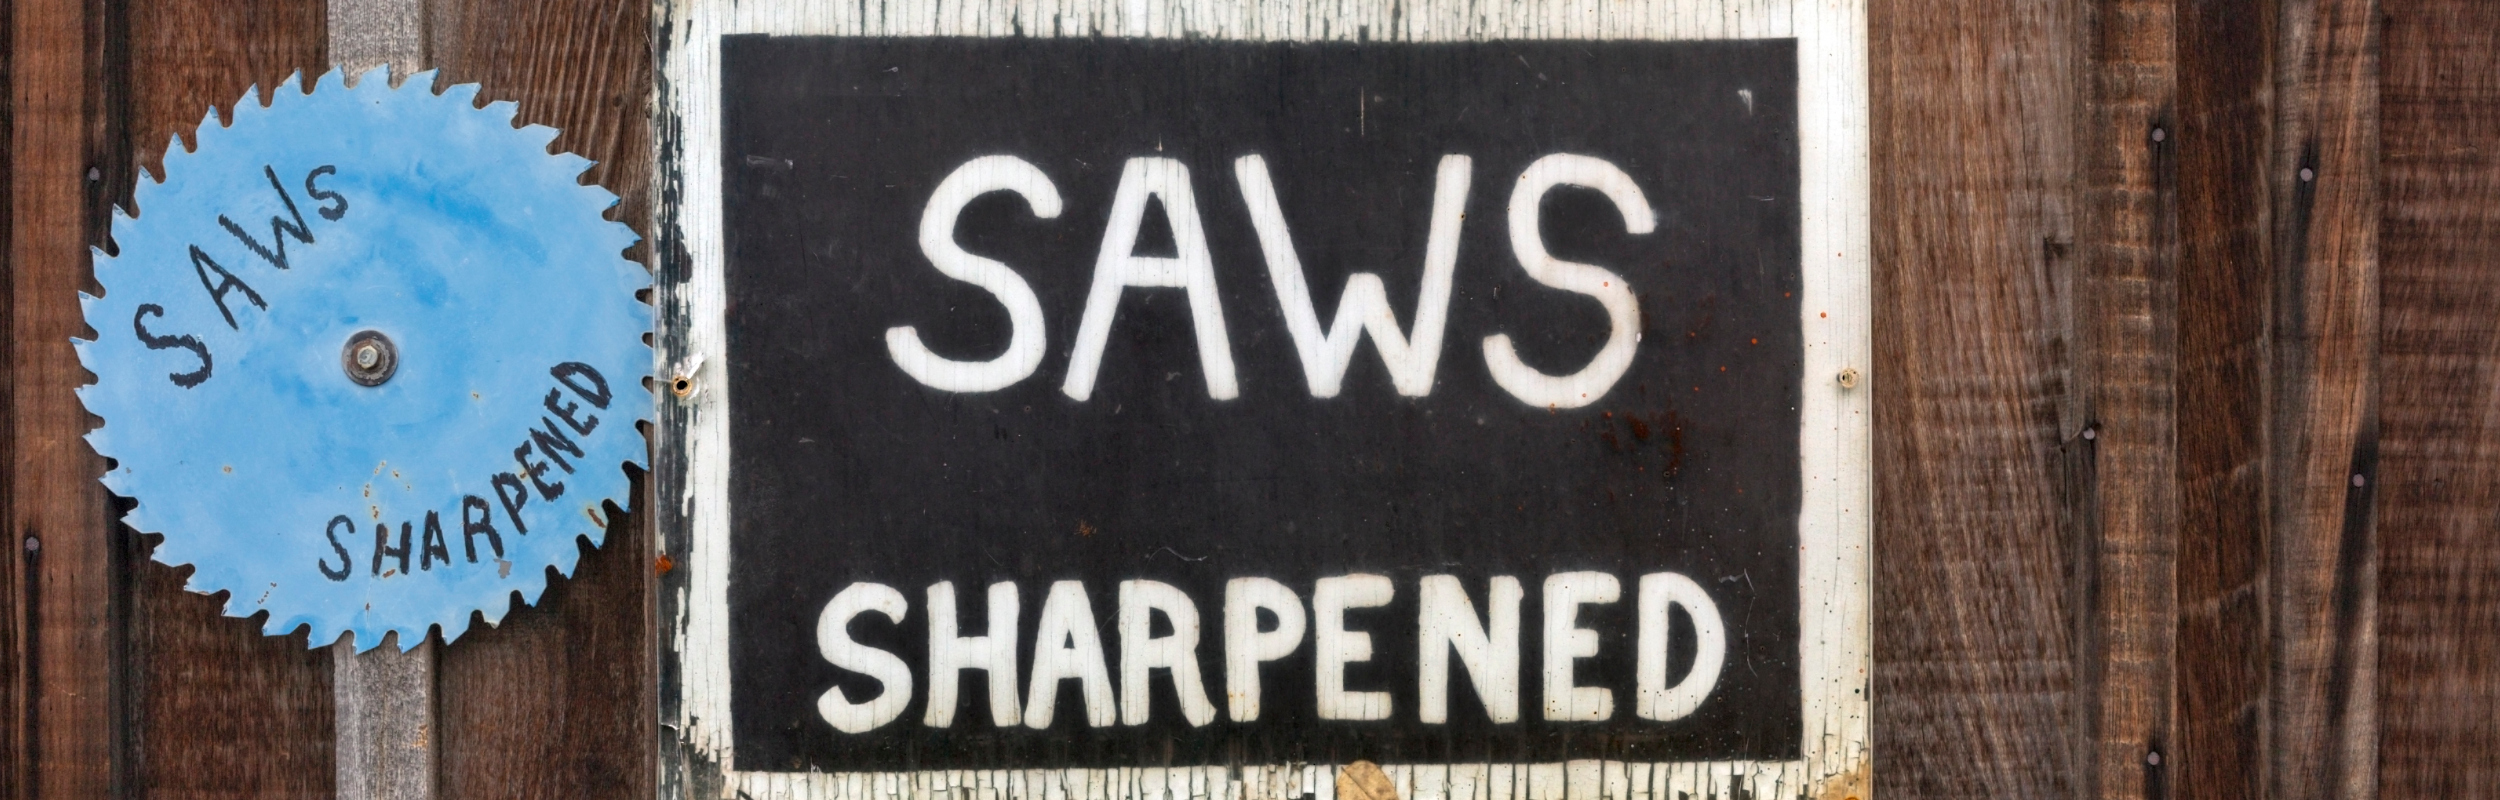 SAWS SHARPENED signs mounted on exterior wood building